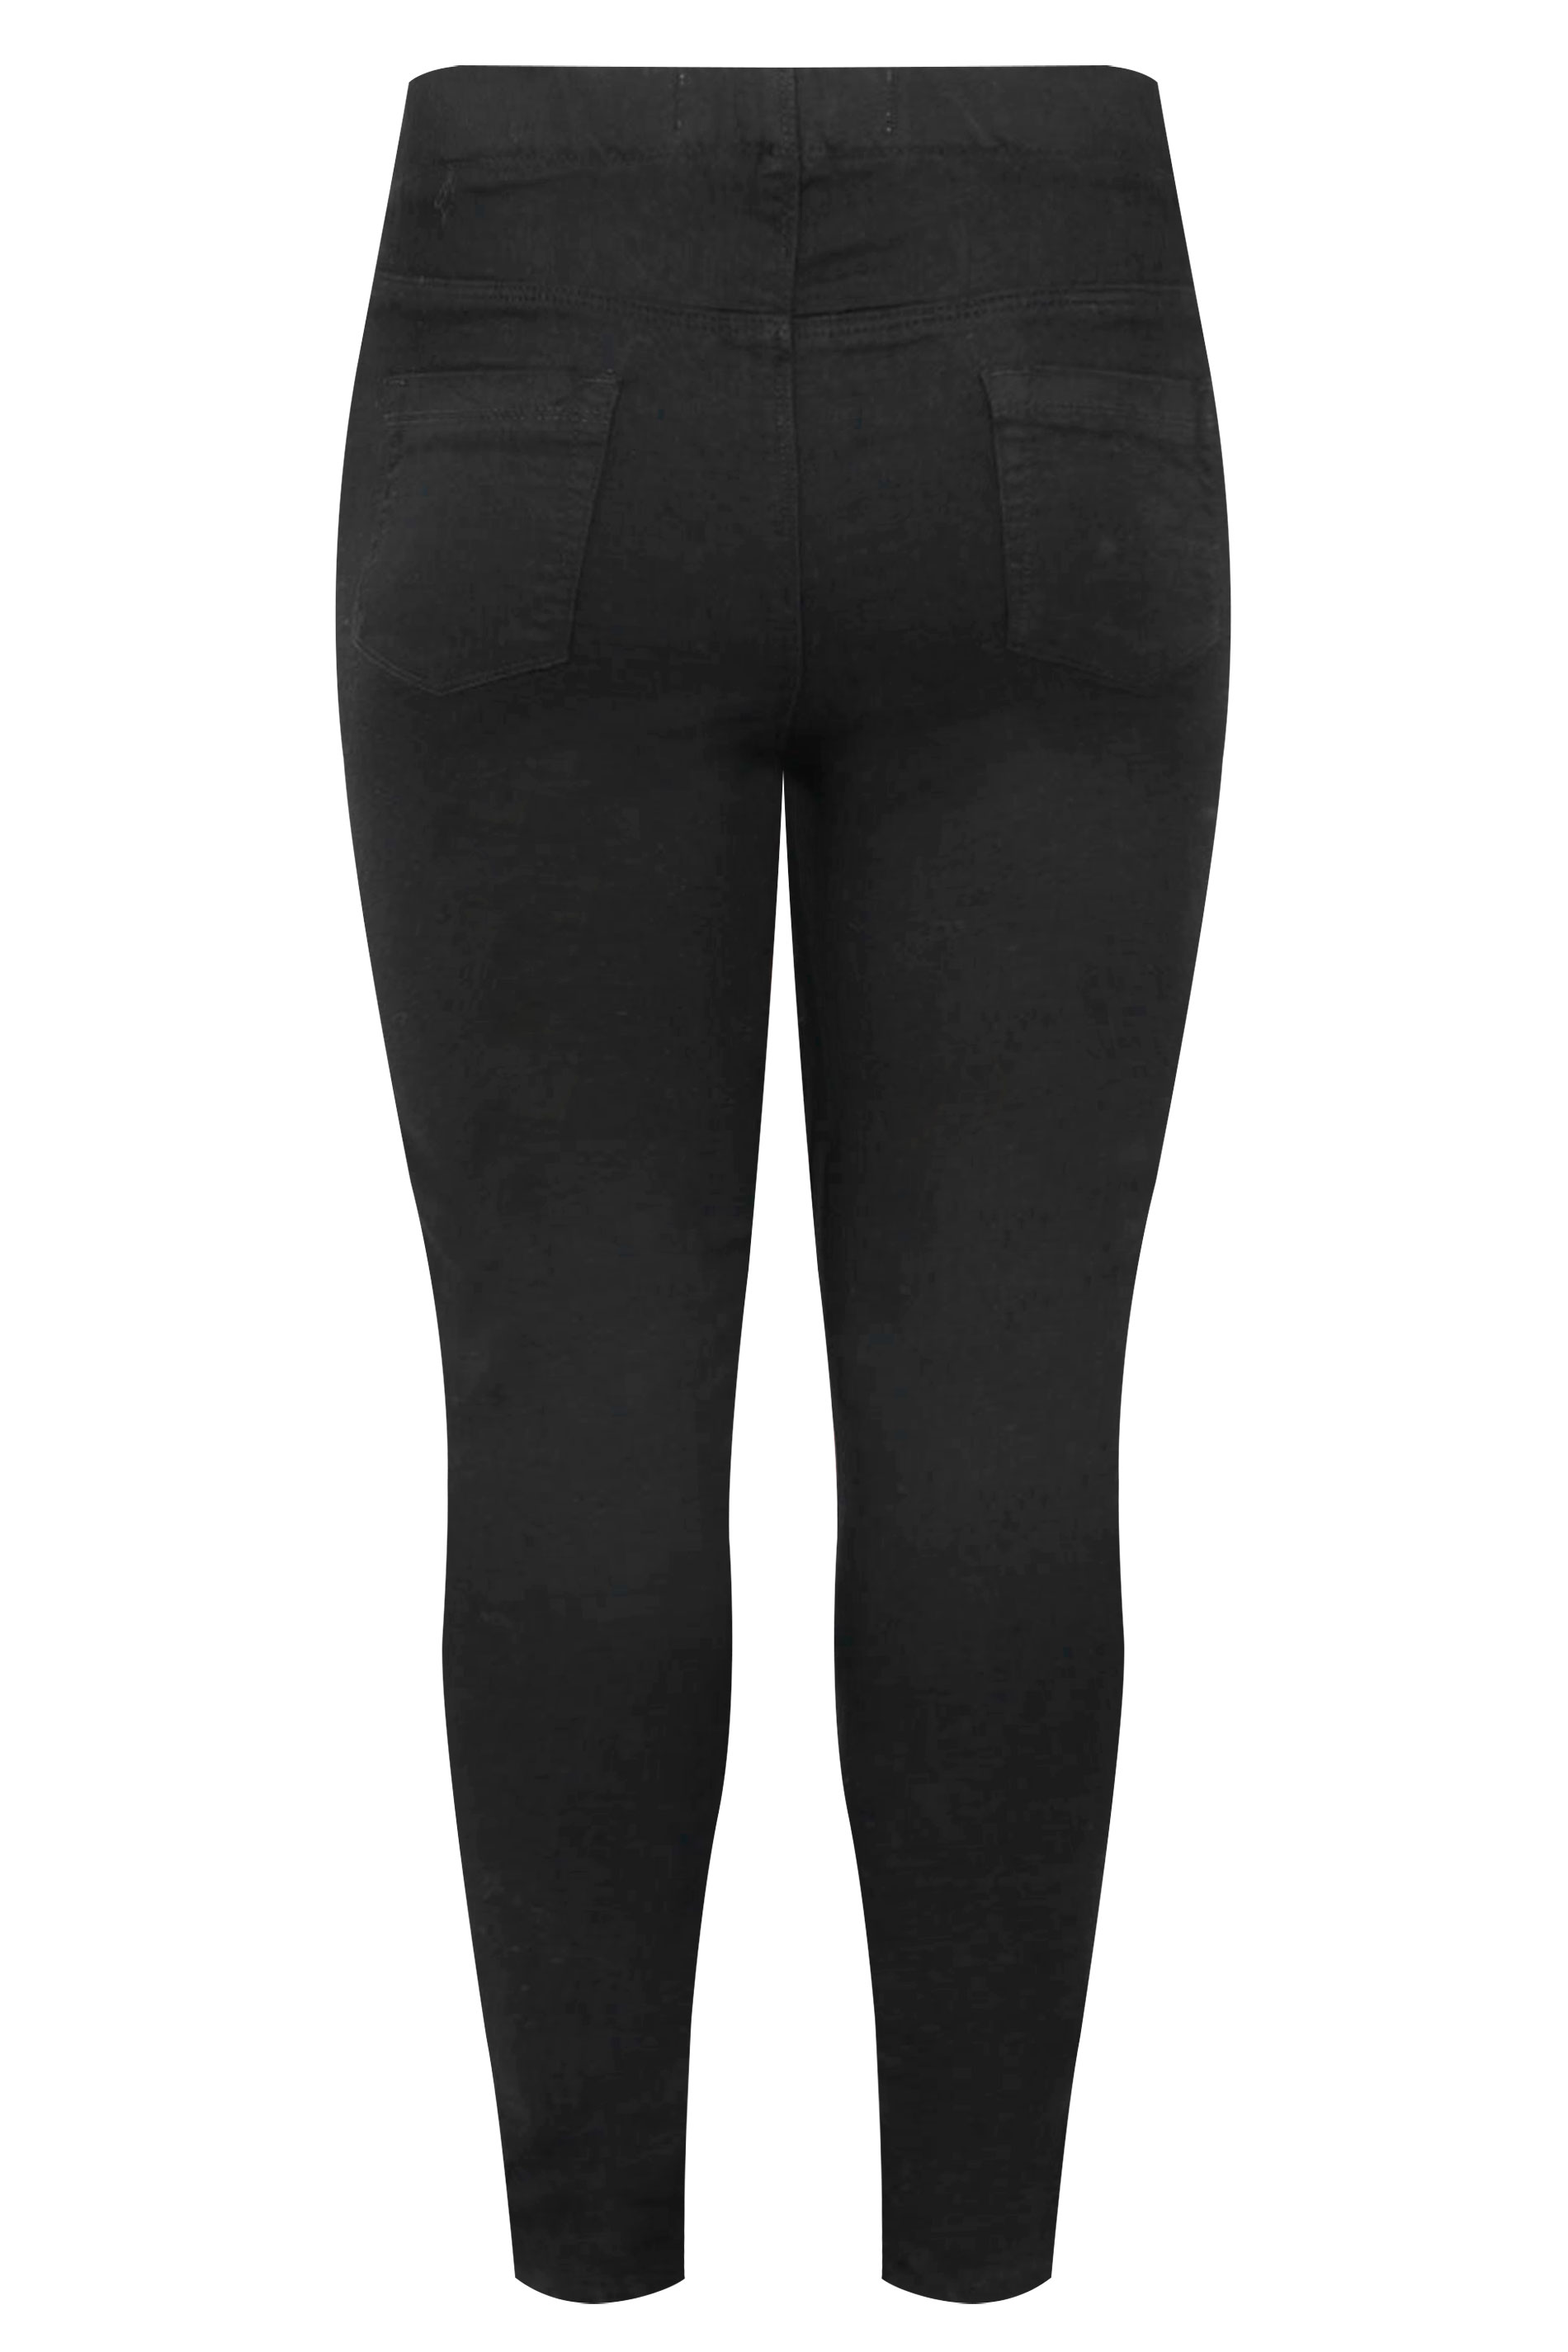 Yours Washed Black Low Rise Jeggings